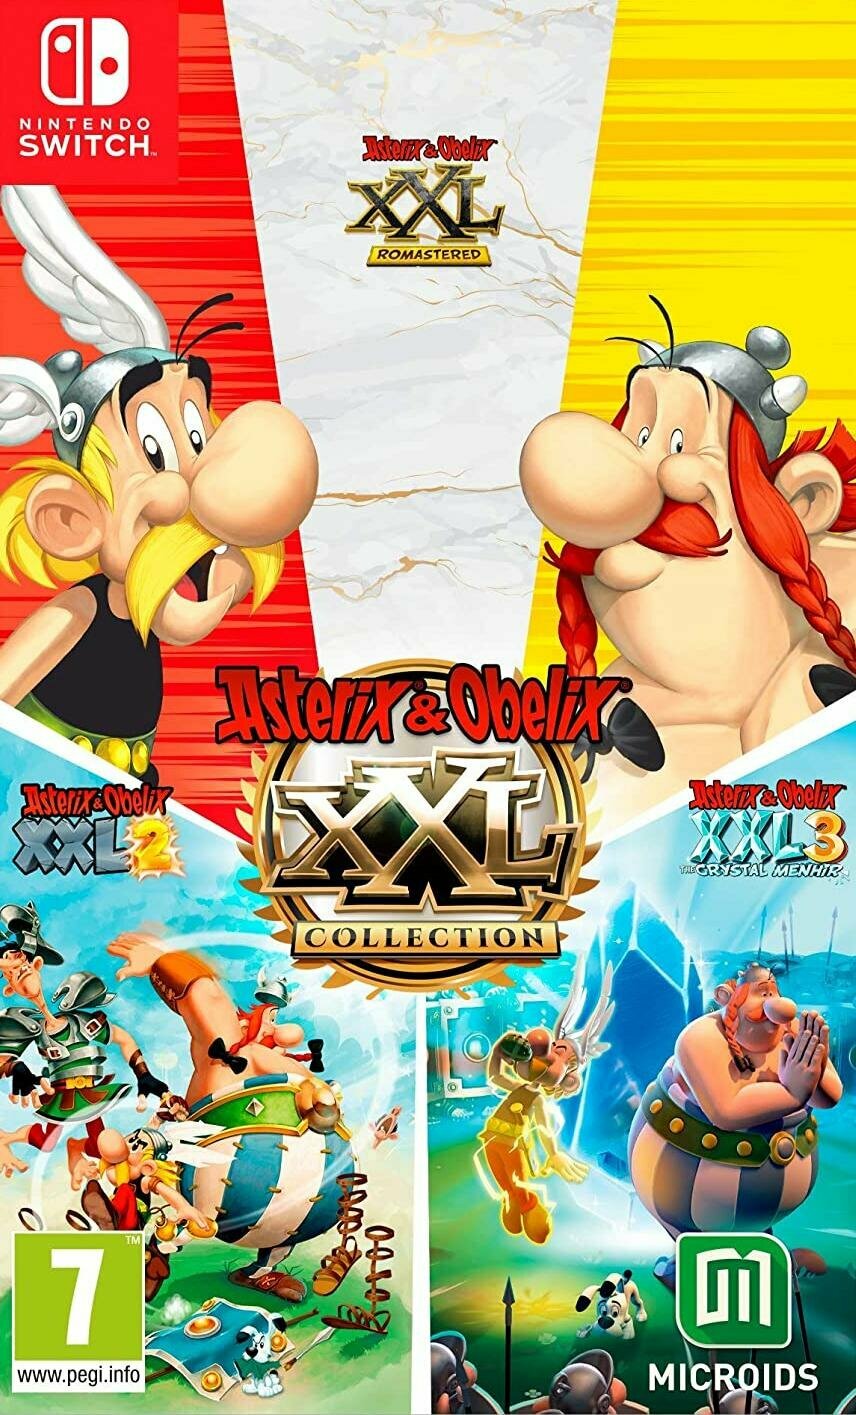 Asterix and Obelix XXL Collection (Switch) английский язык